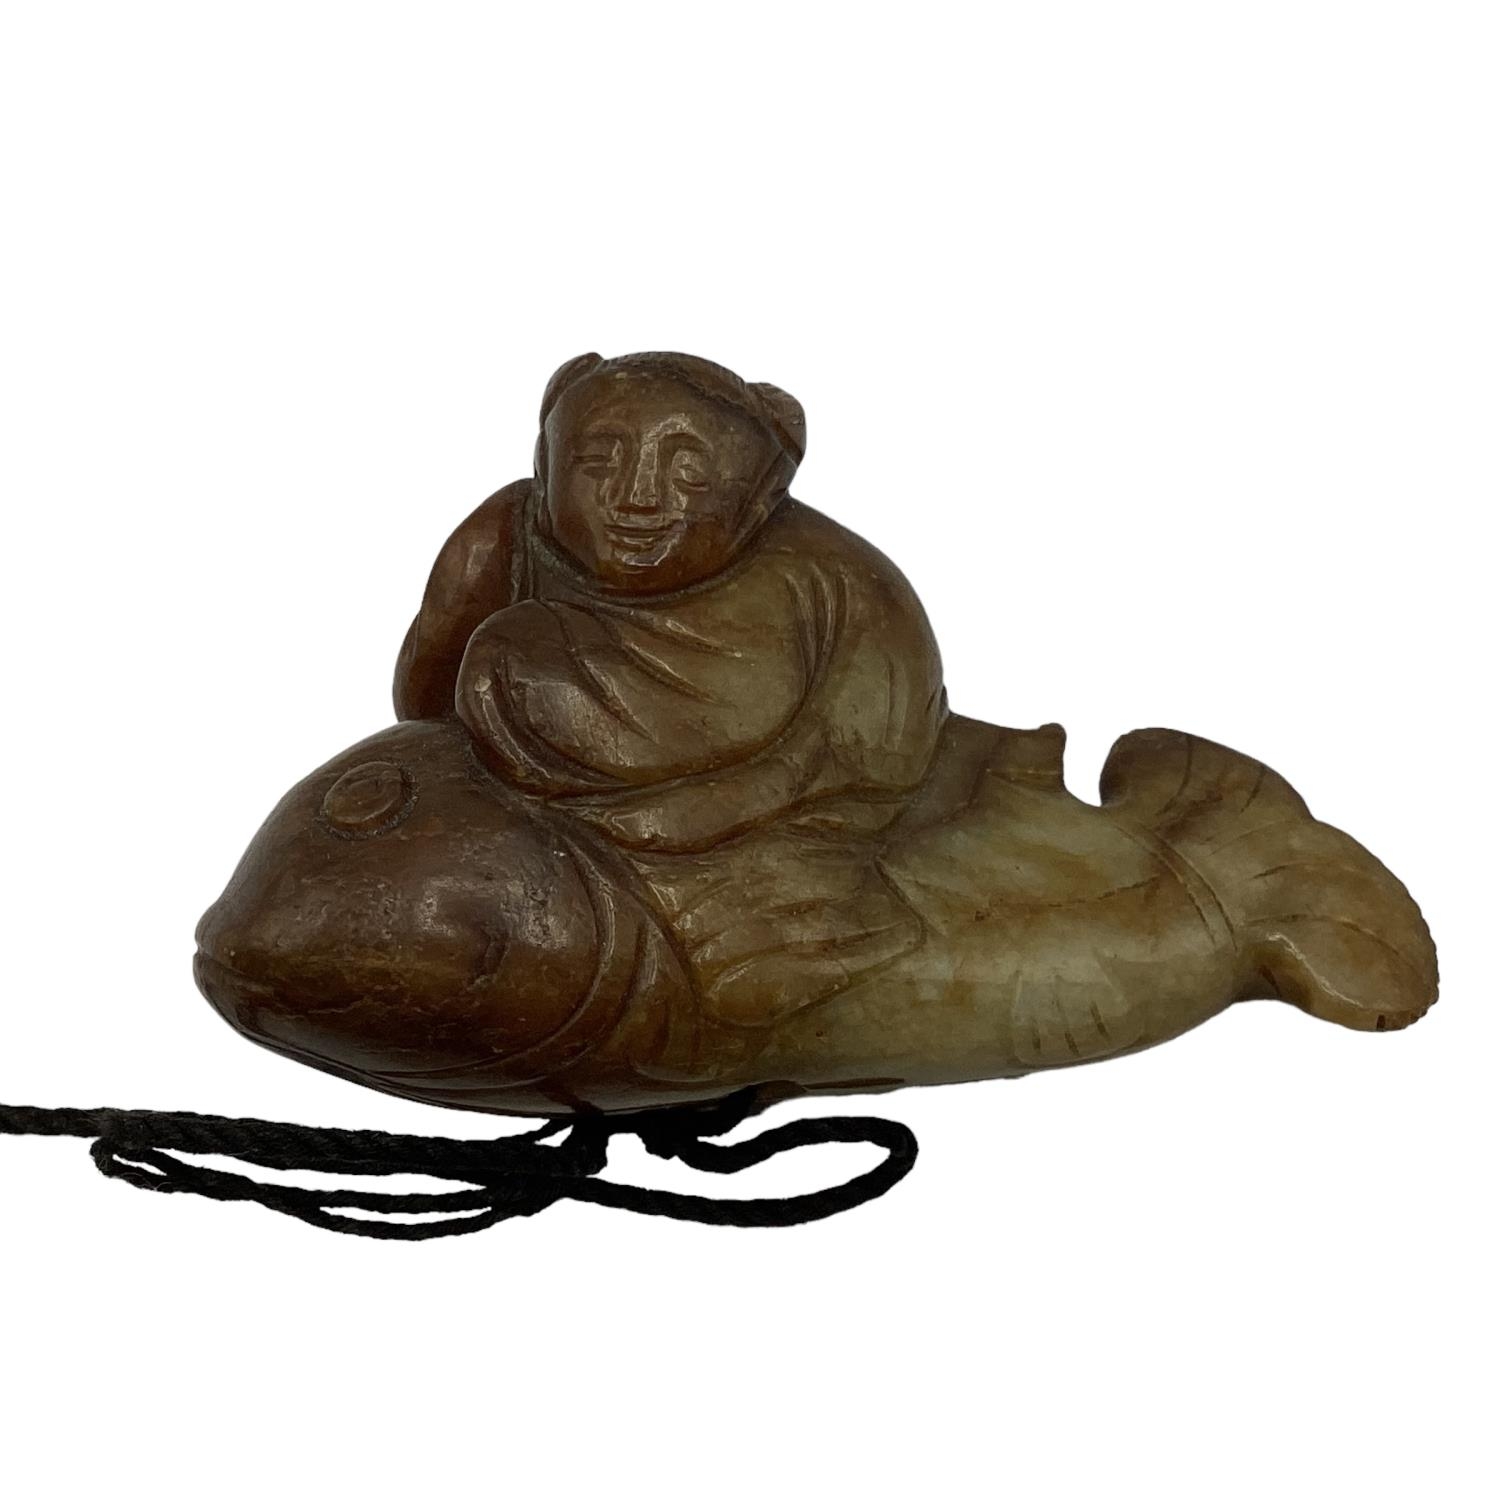 A carved jade figure of a man riding a fish 7cm x 4cm.